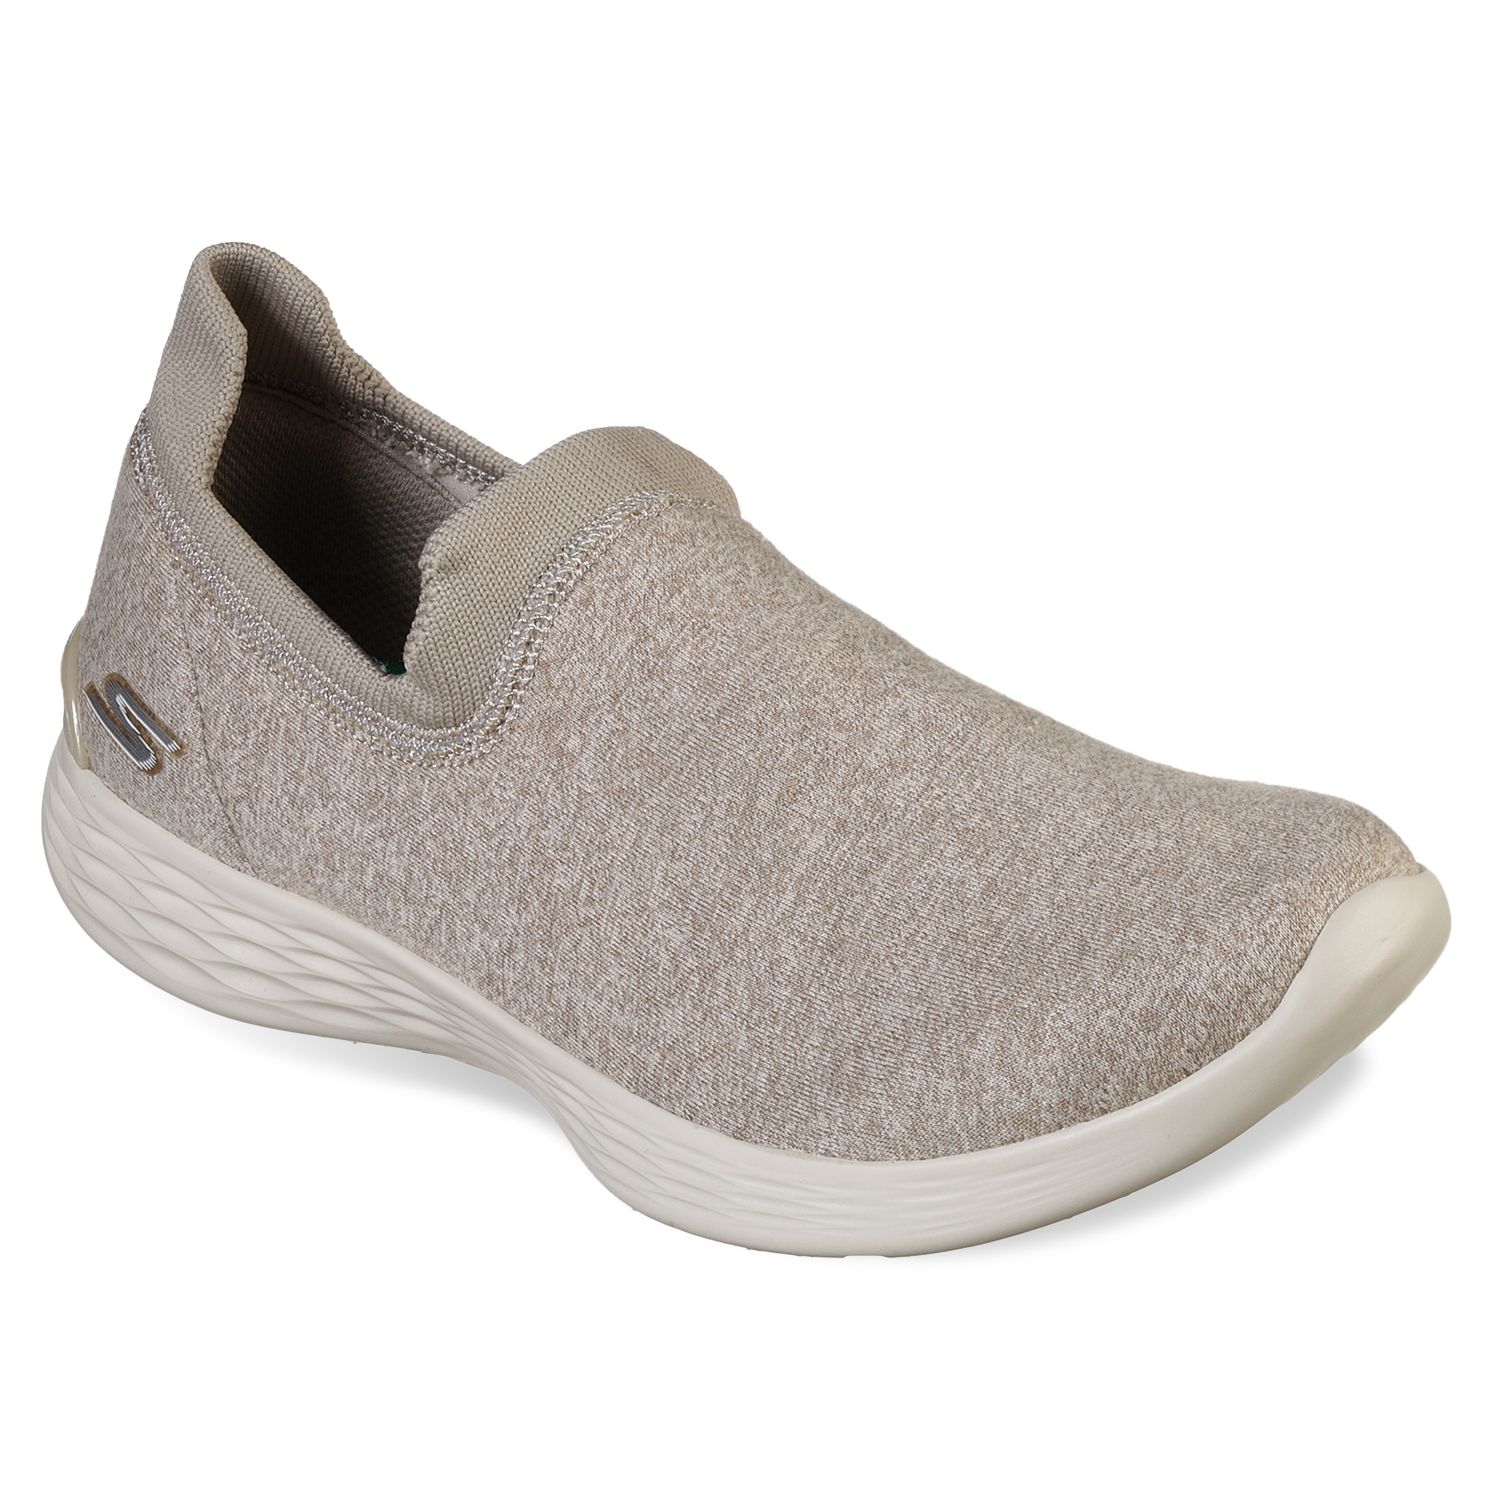 skechers ladies you knit slip on shoes